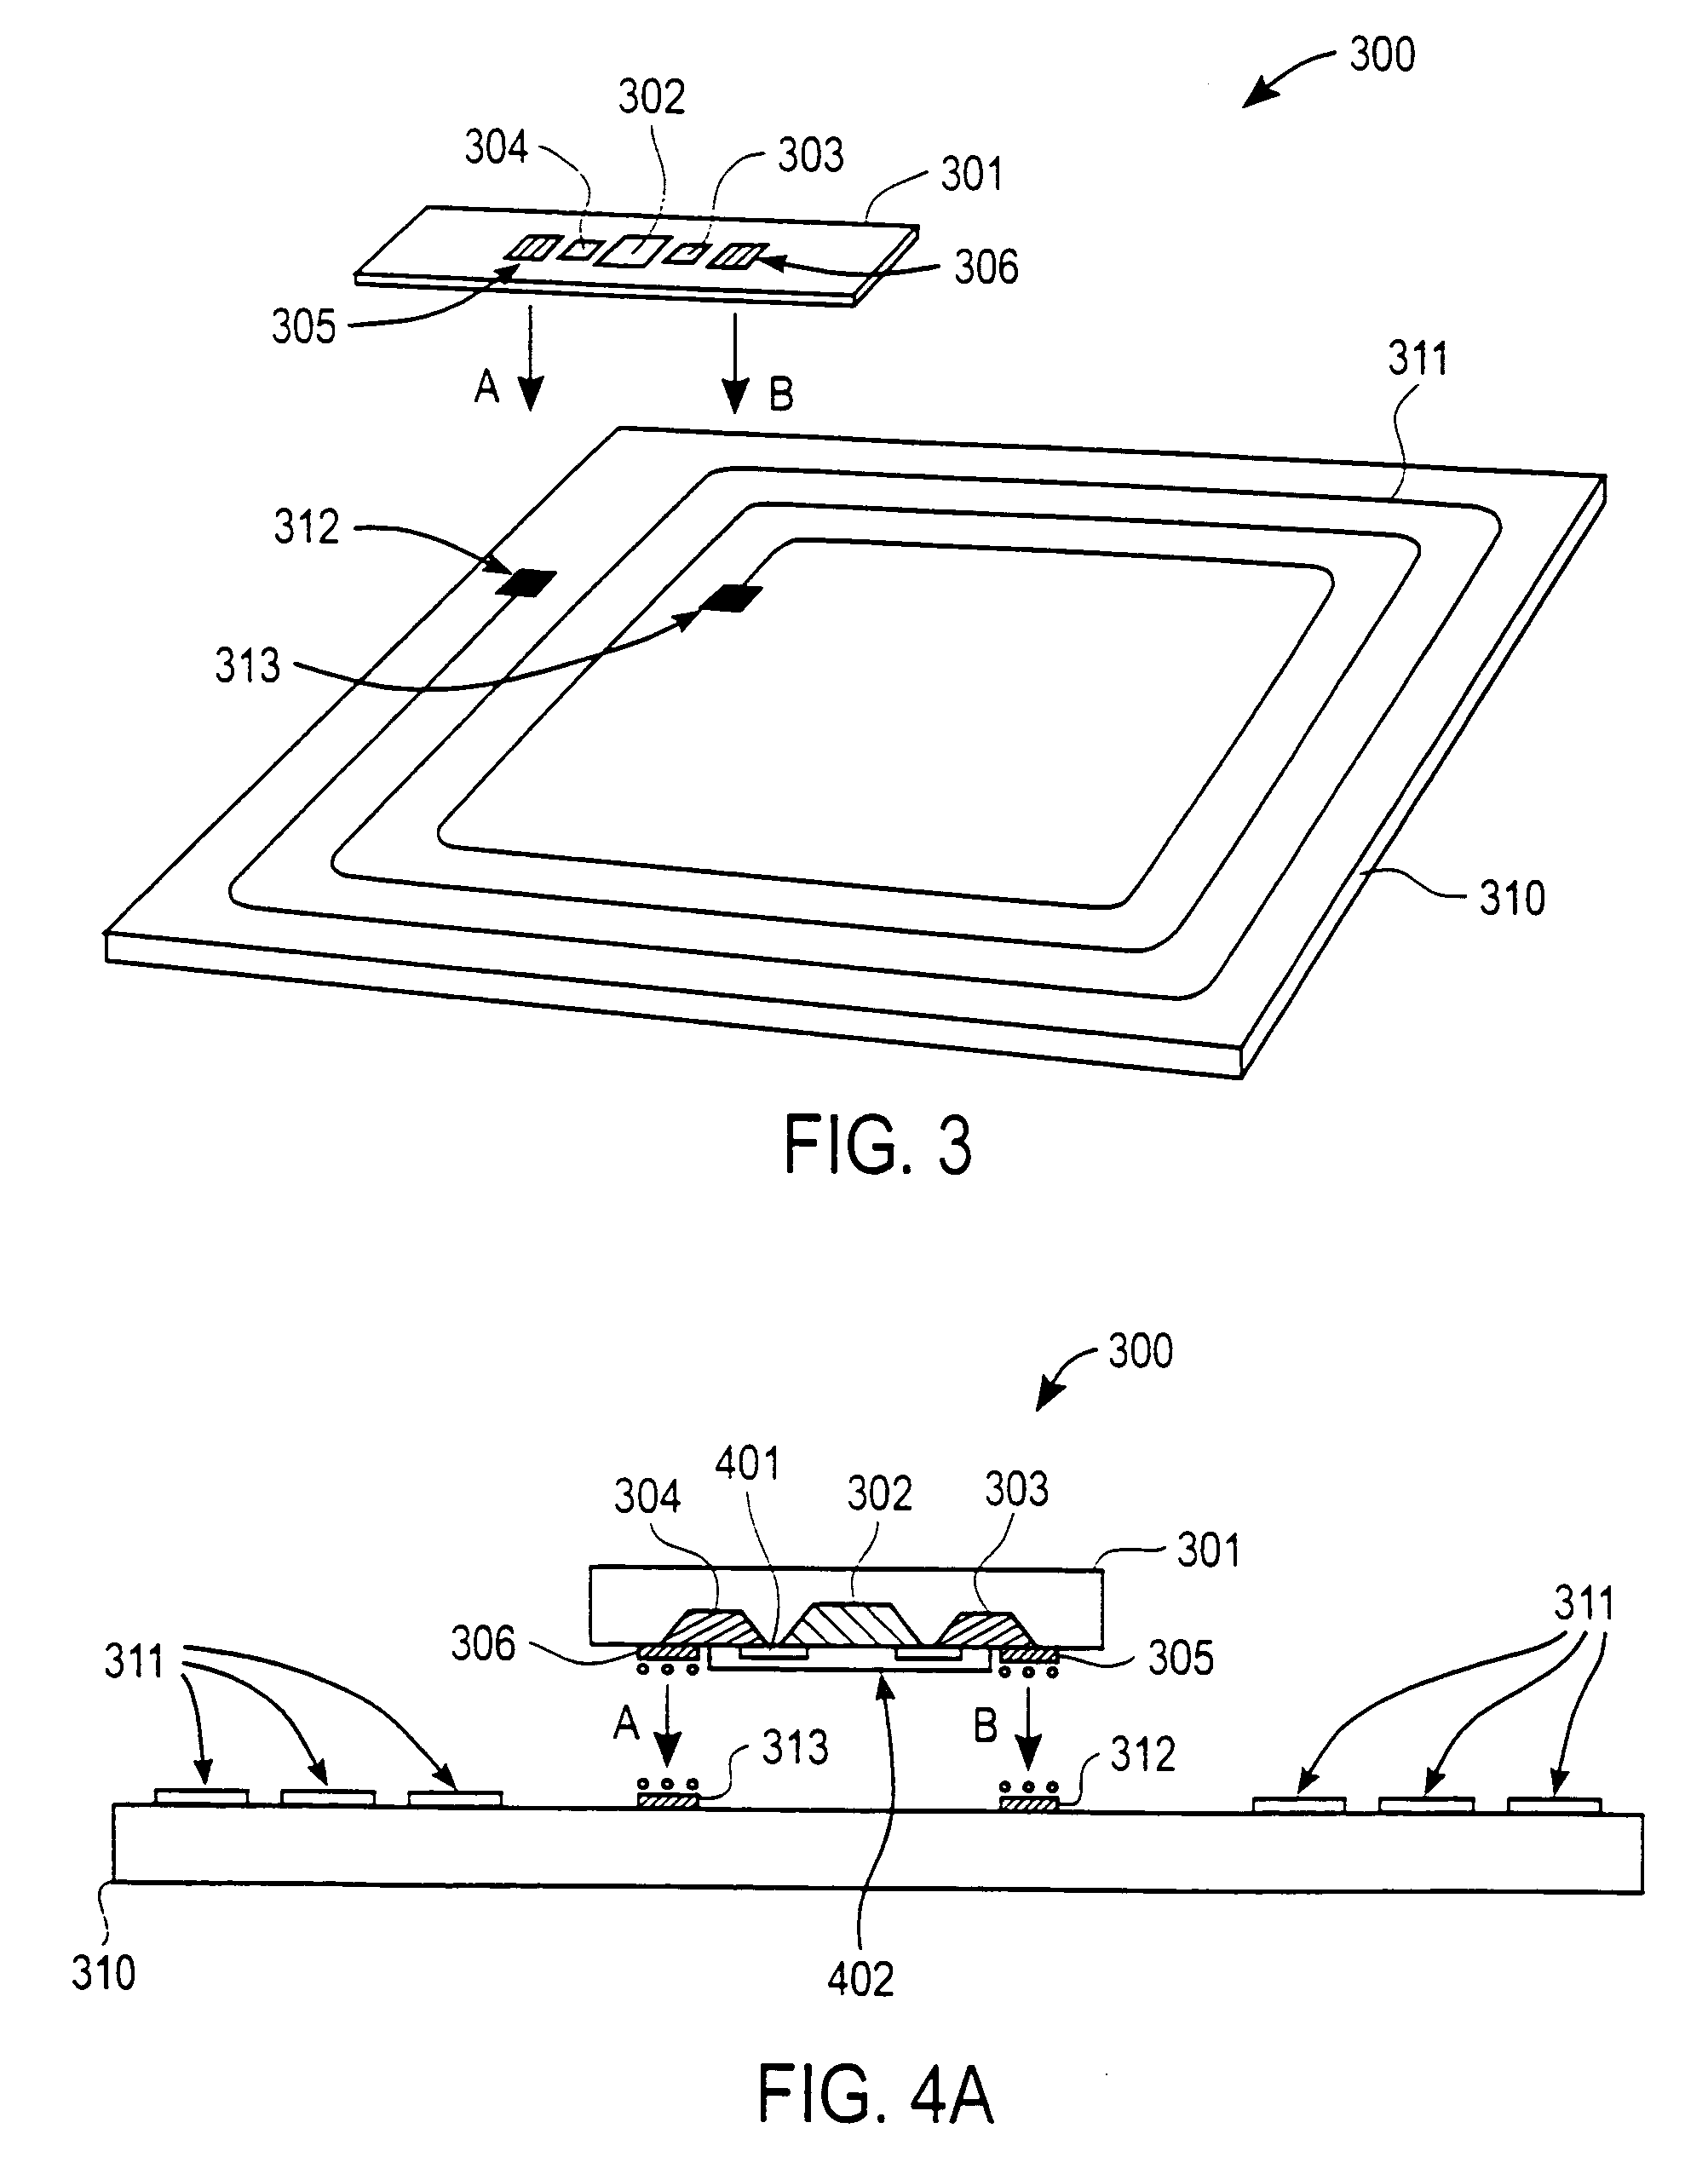 Electronic devices with small functional elements supported on a carrier